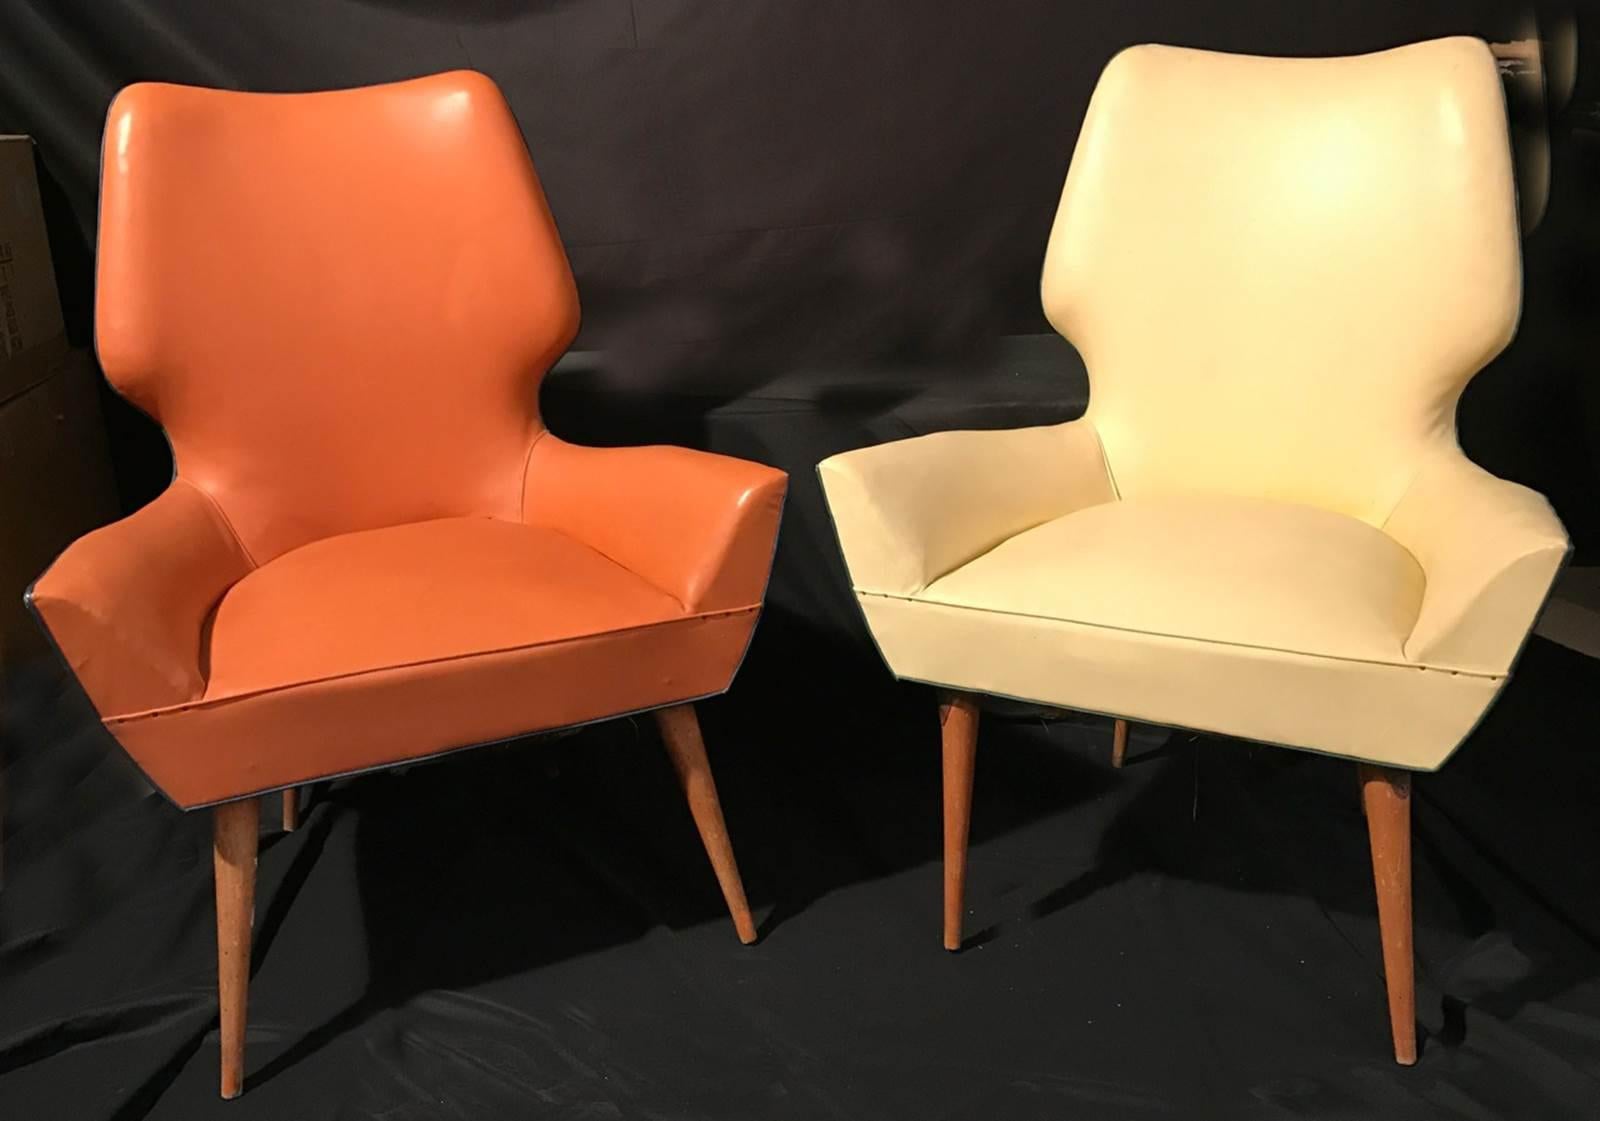 Plastic Pair of Mid-Century Modern Gio Ponti Style Chairs, 1950s For Sale